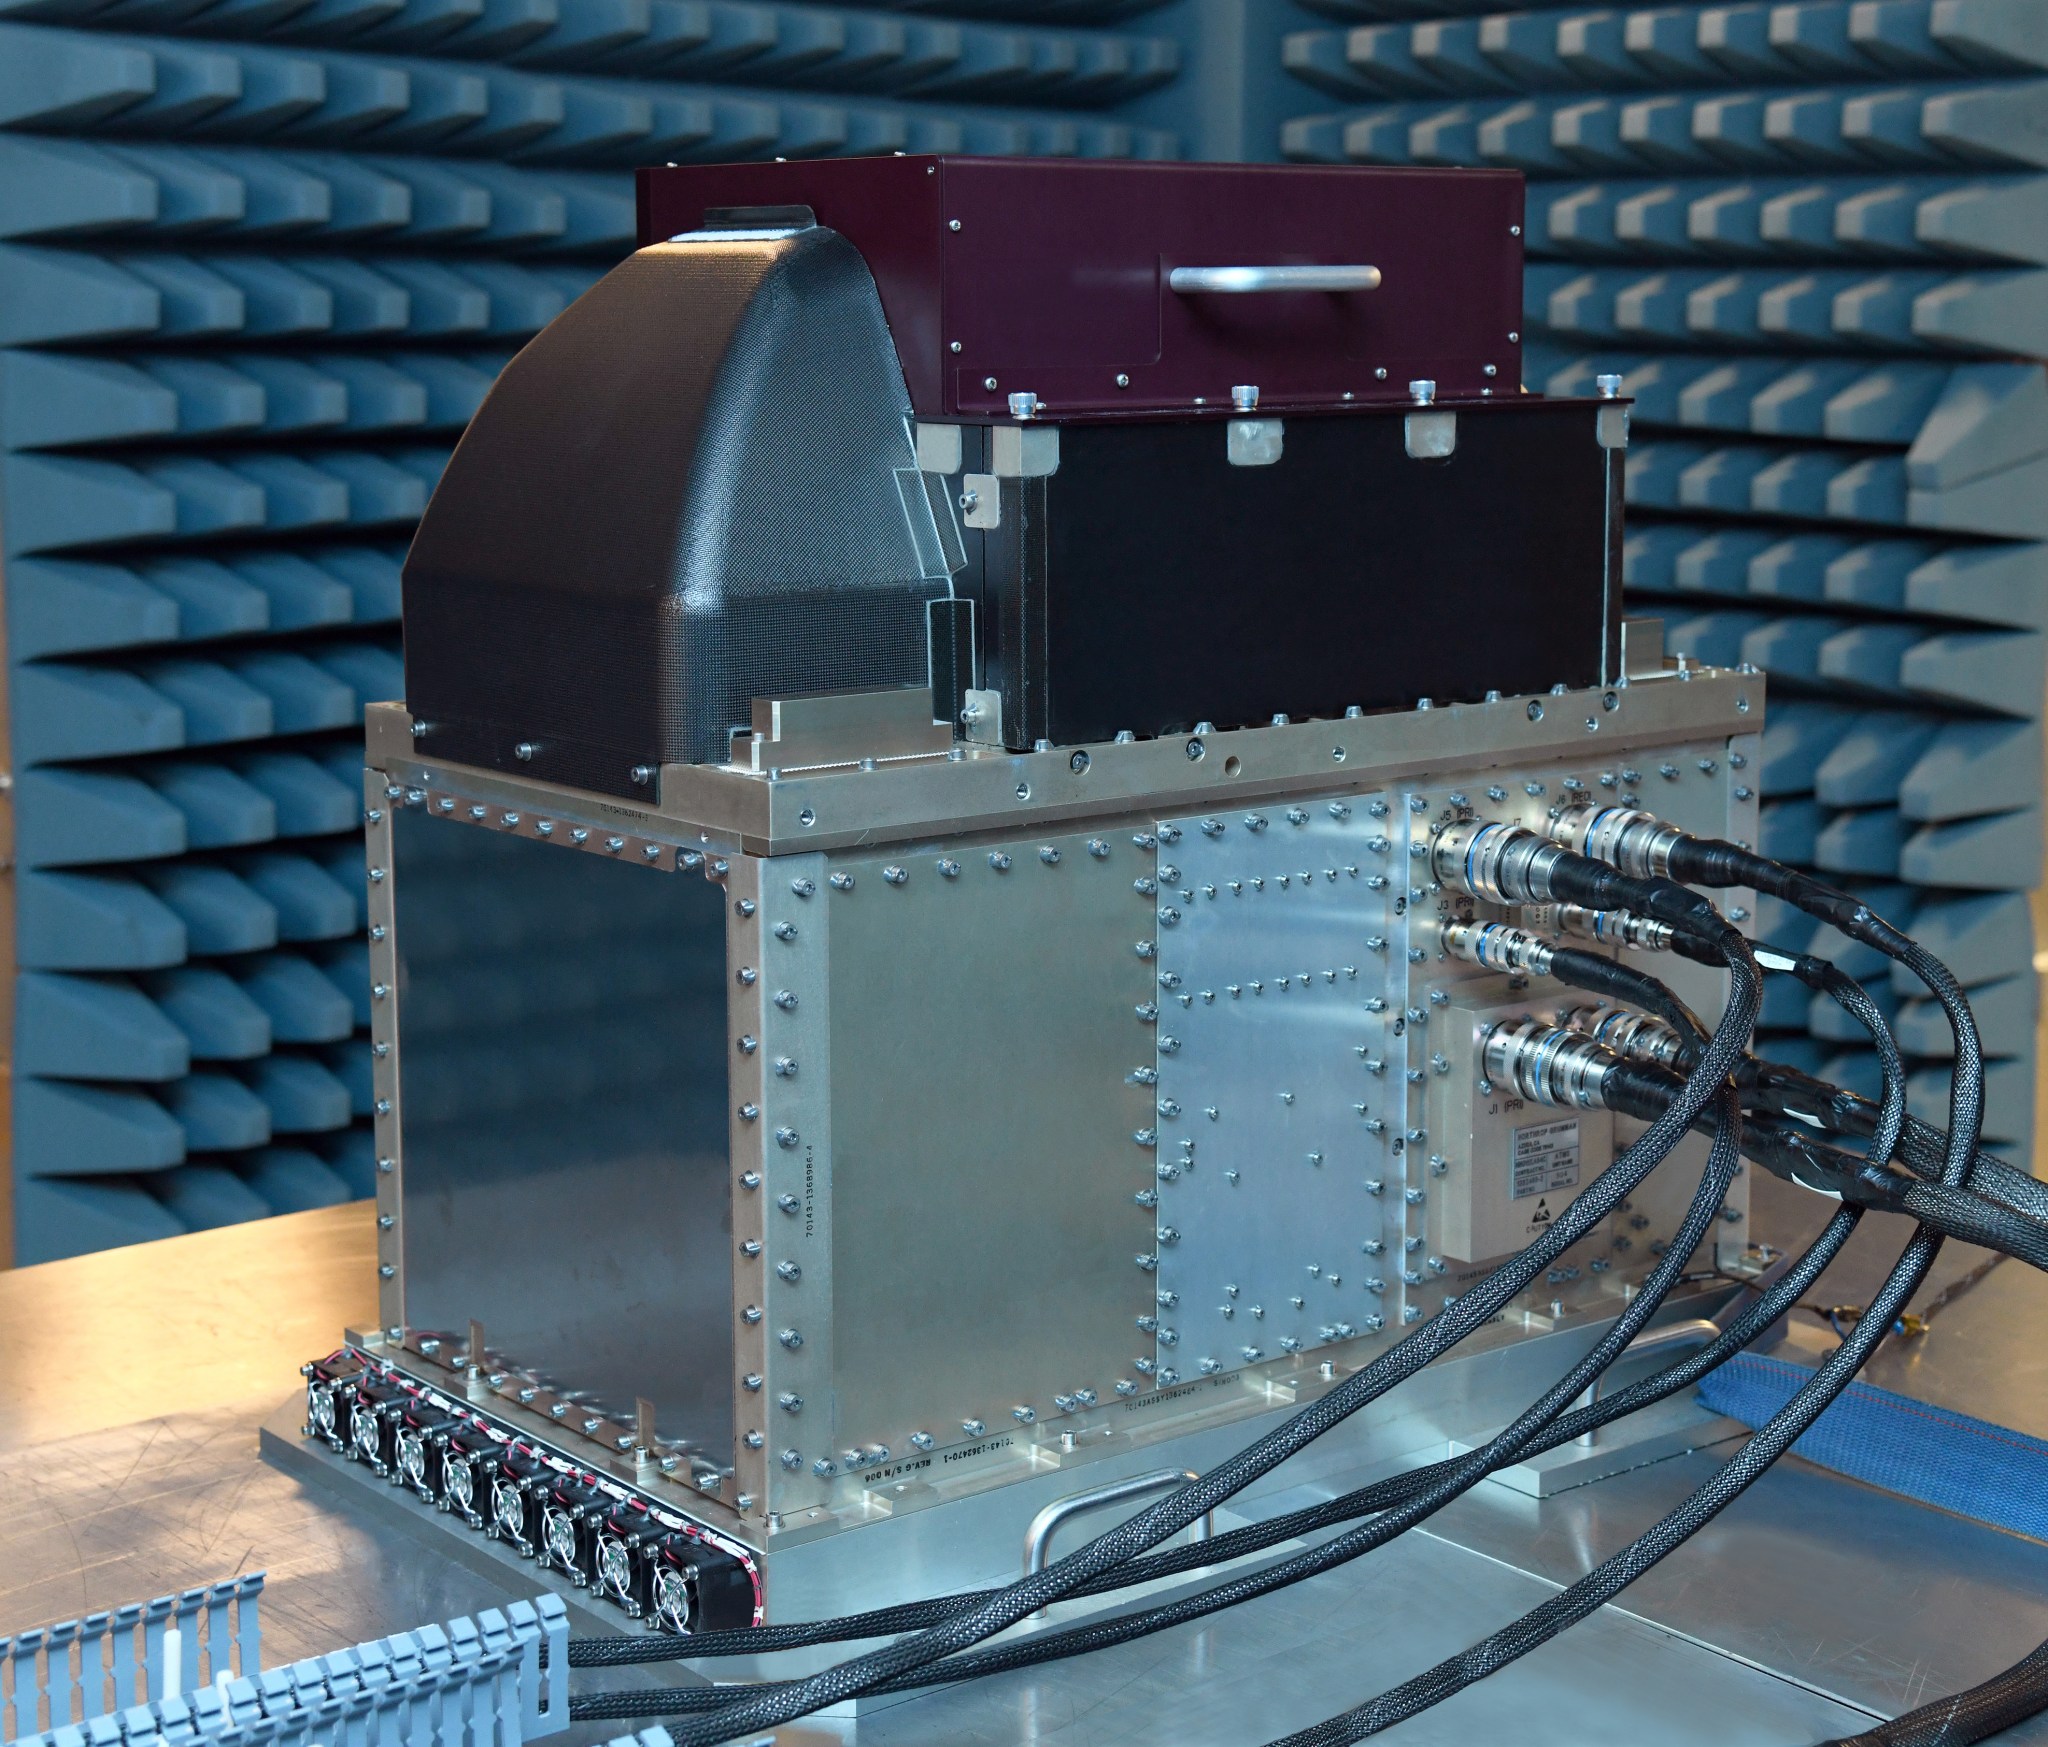 The Advanced Technology Microwave Sounder, or ATMS, an instrument shaped like a silver box with dark matte boxes stacked on top and cables plugged into the side. In this image, ATMS sits on a silver table in a room lined with foam spikes.